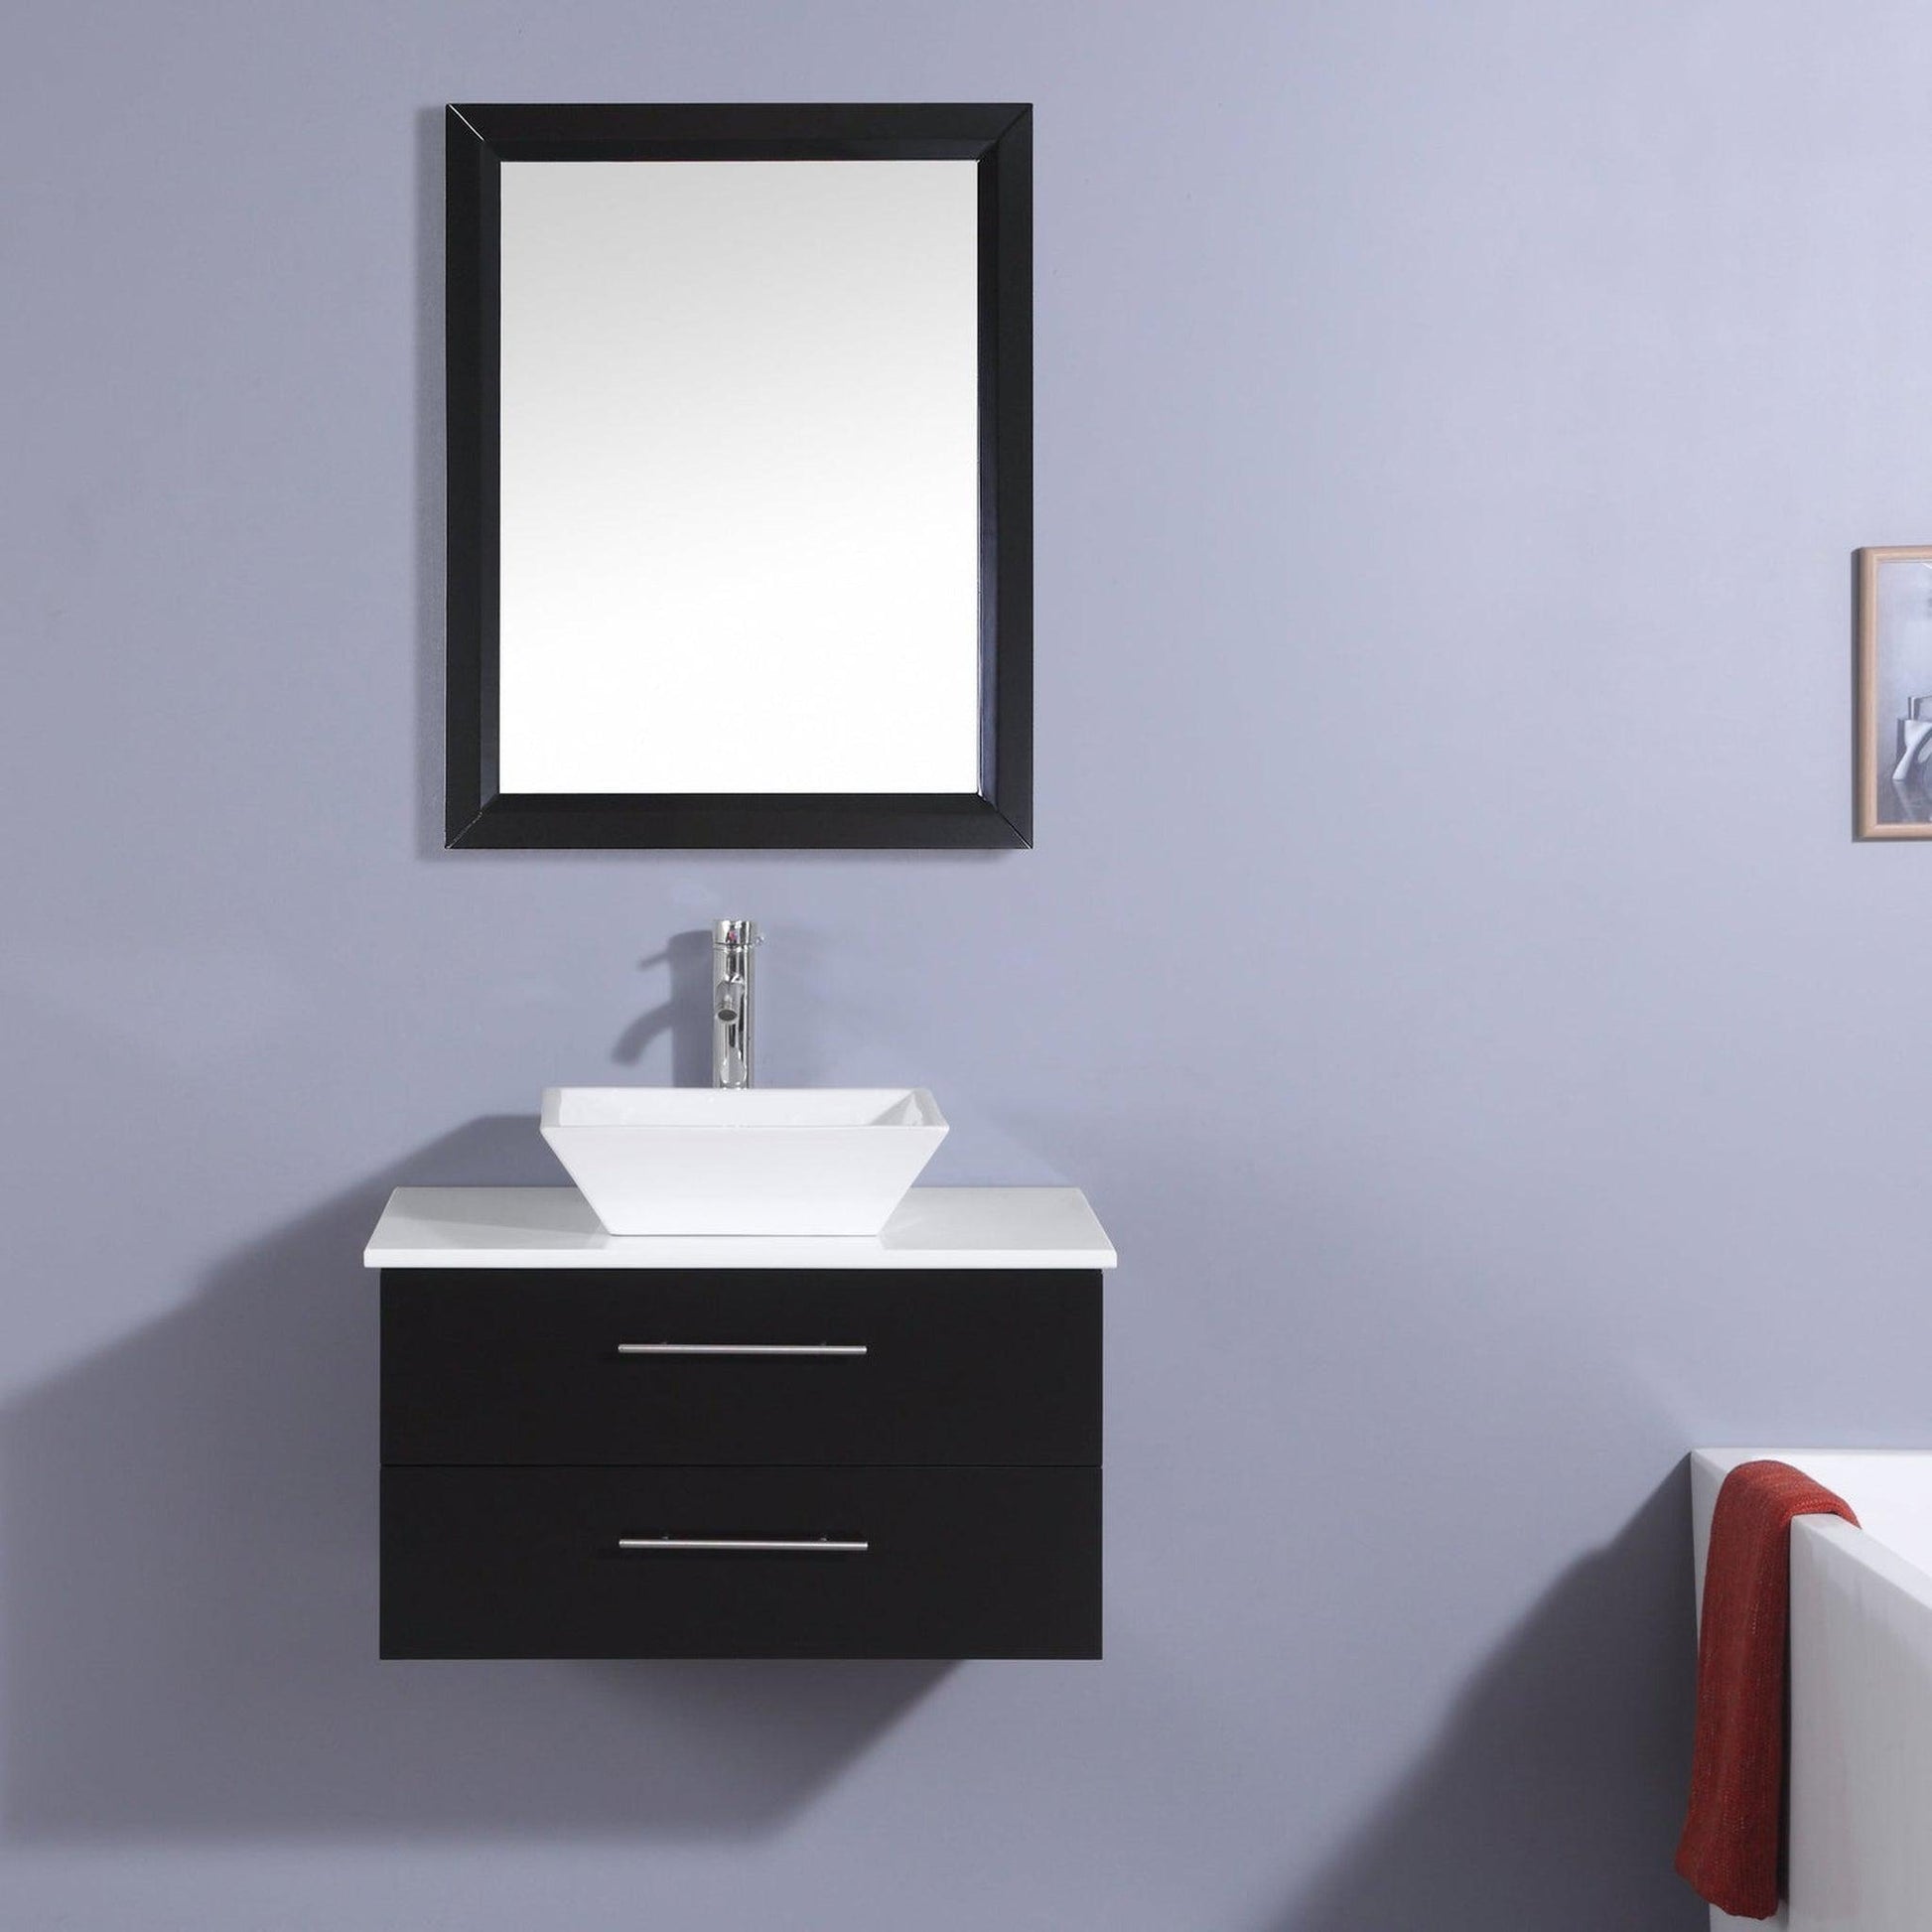 Eviva Totti Wave 30" x 16" Espresso Wall-Mounted Bathroom Vanity With White Man-Made Stone Countertop and Single Porcelain Sink